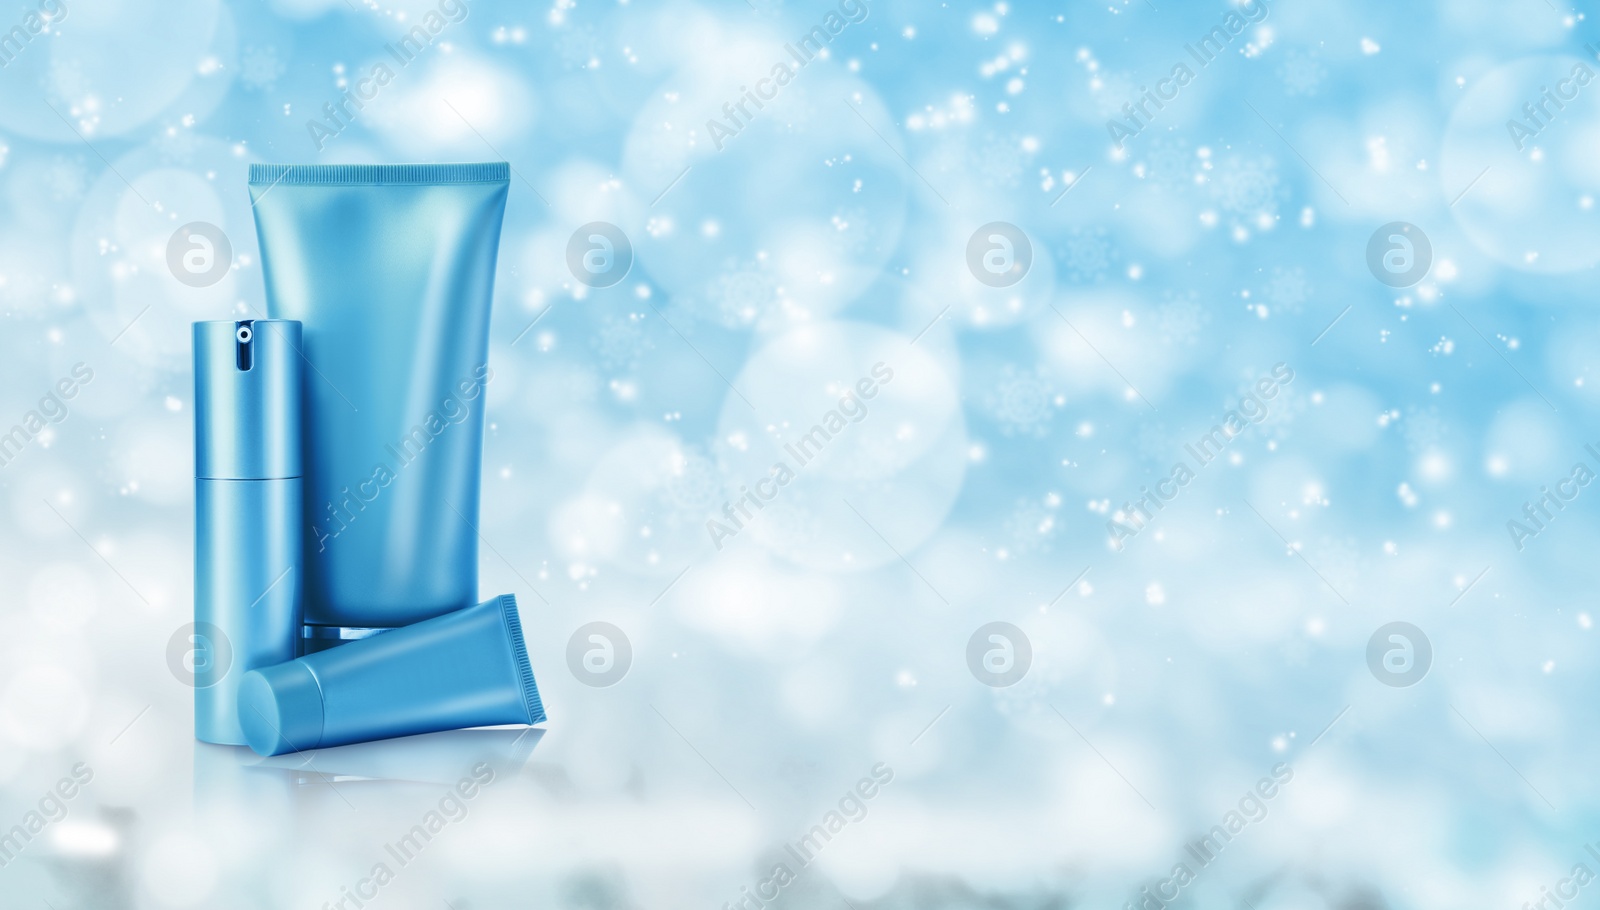 Image of Different cosmetic products on light blue background with blurred snowflakes, space for text. Winter skin care